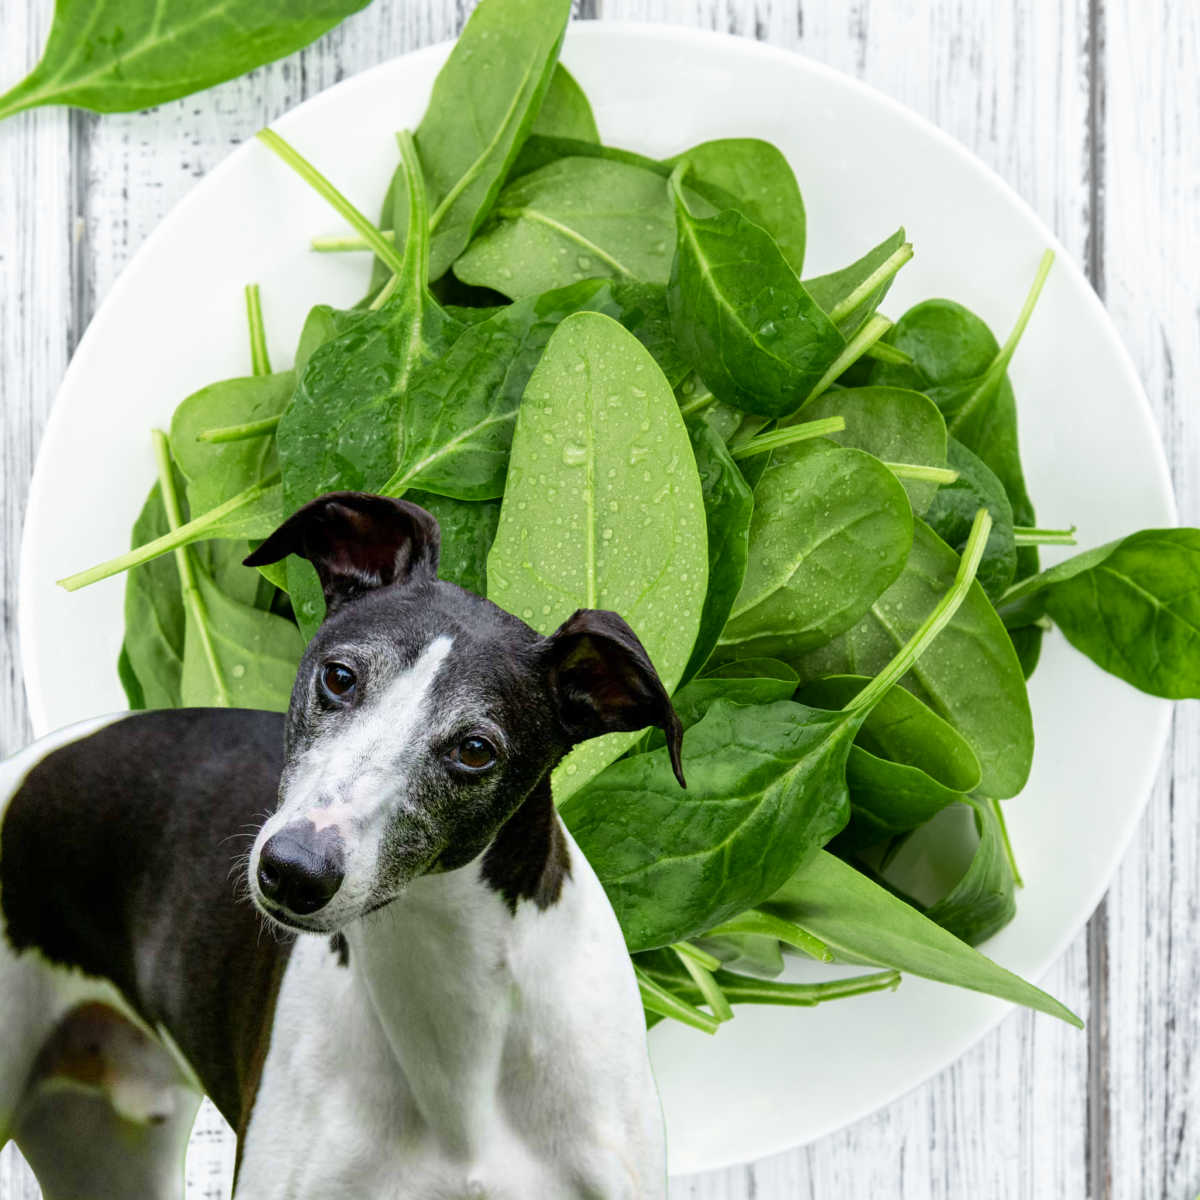 dog in front of a plate of spinach leaves.